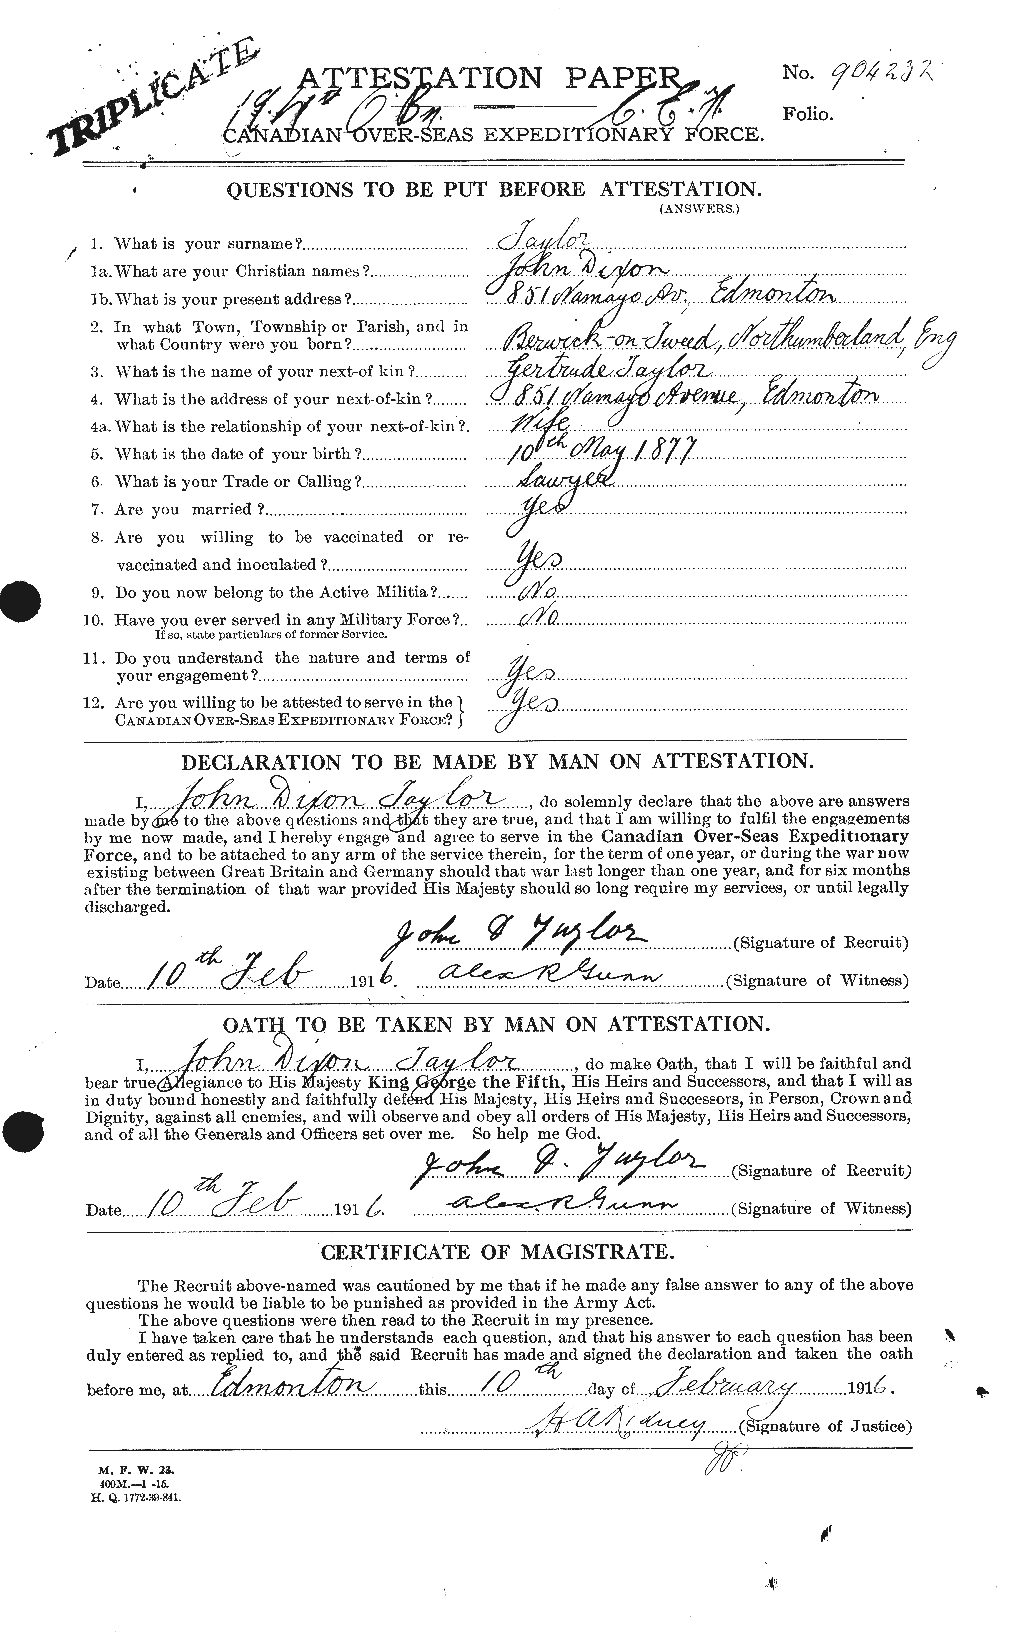 Personnel Records of the First World War - CEF 627067a